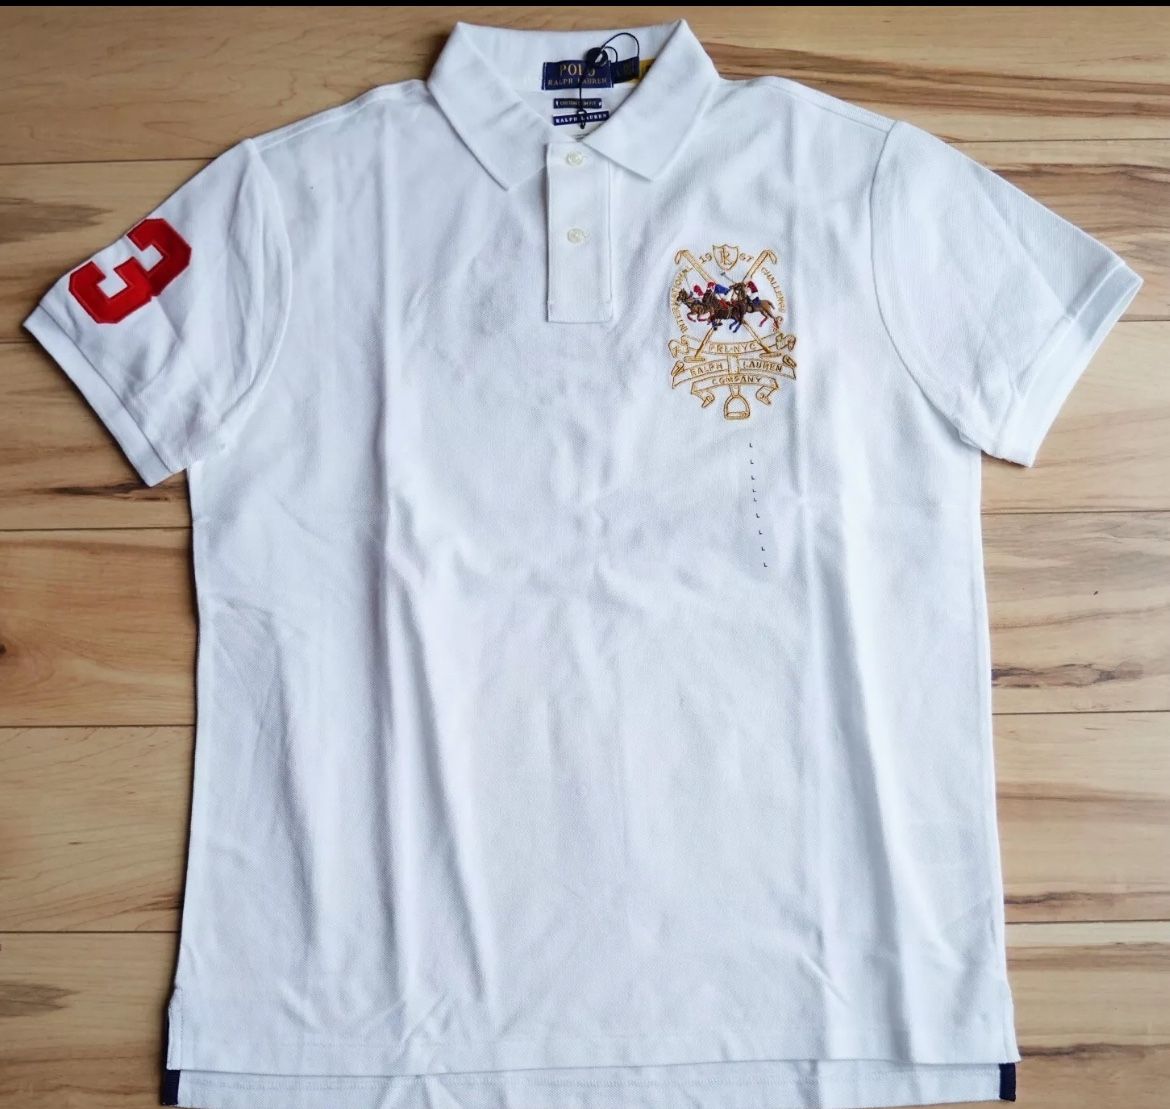 Polo Ralph Lauren Triple Pony Players Horse Racing Embroidered White Polo Mesh Shirt, Size 2XB 